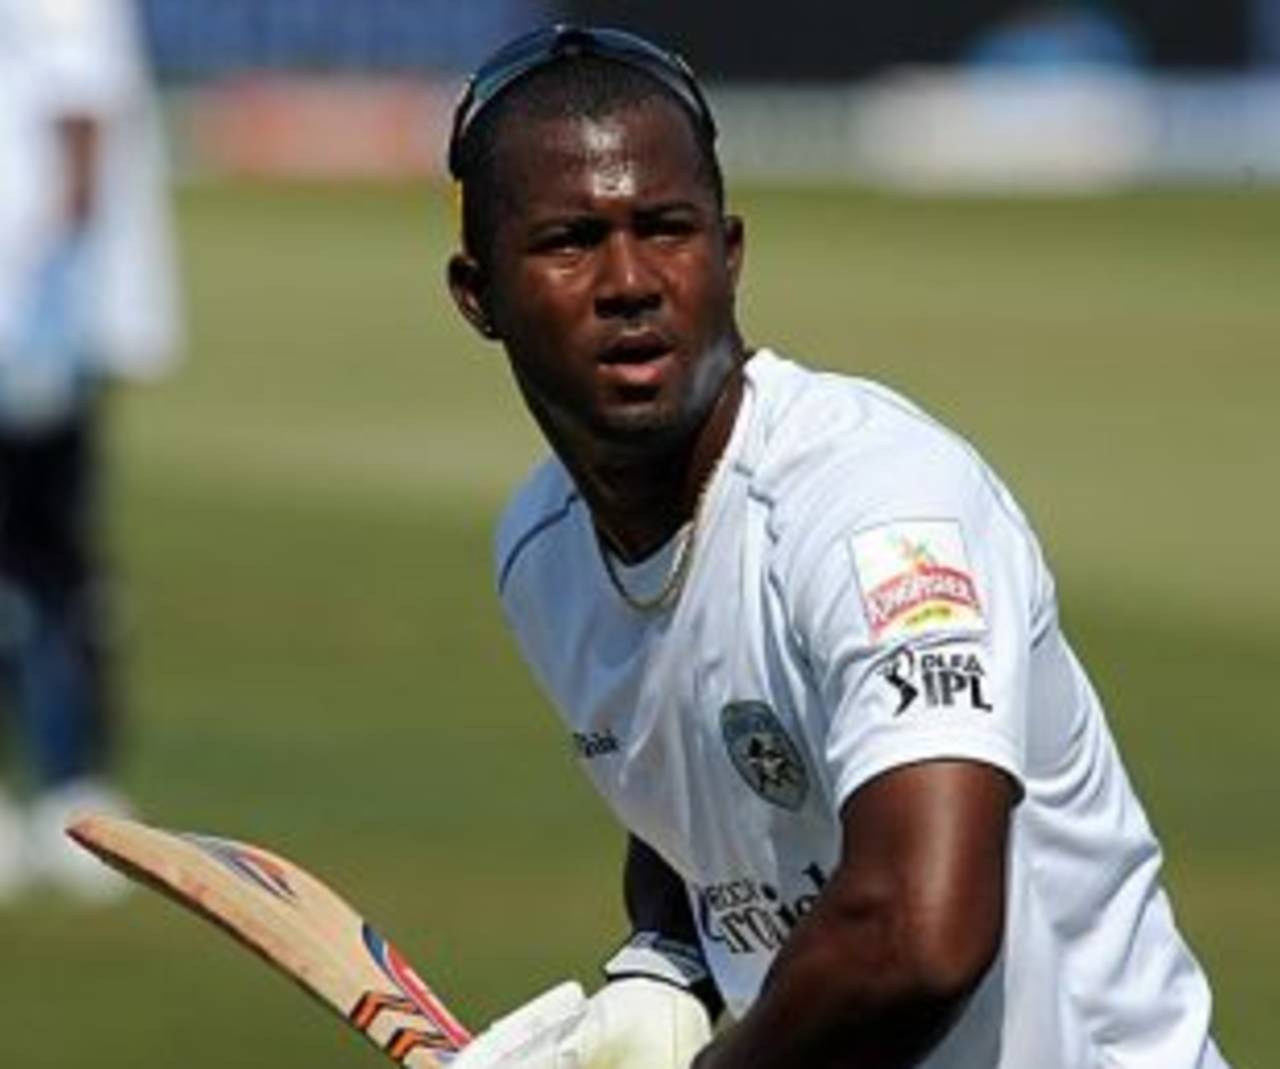 Dwayne Smith during a practice session, Deccan Chargers v Mumbai Indians, IPL, 12th Match, Durban, April 25, 2009